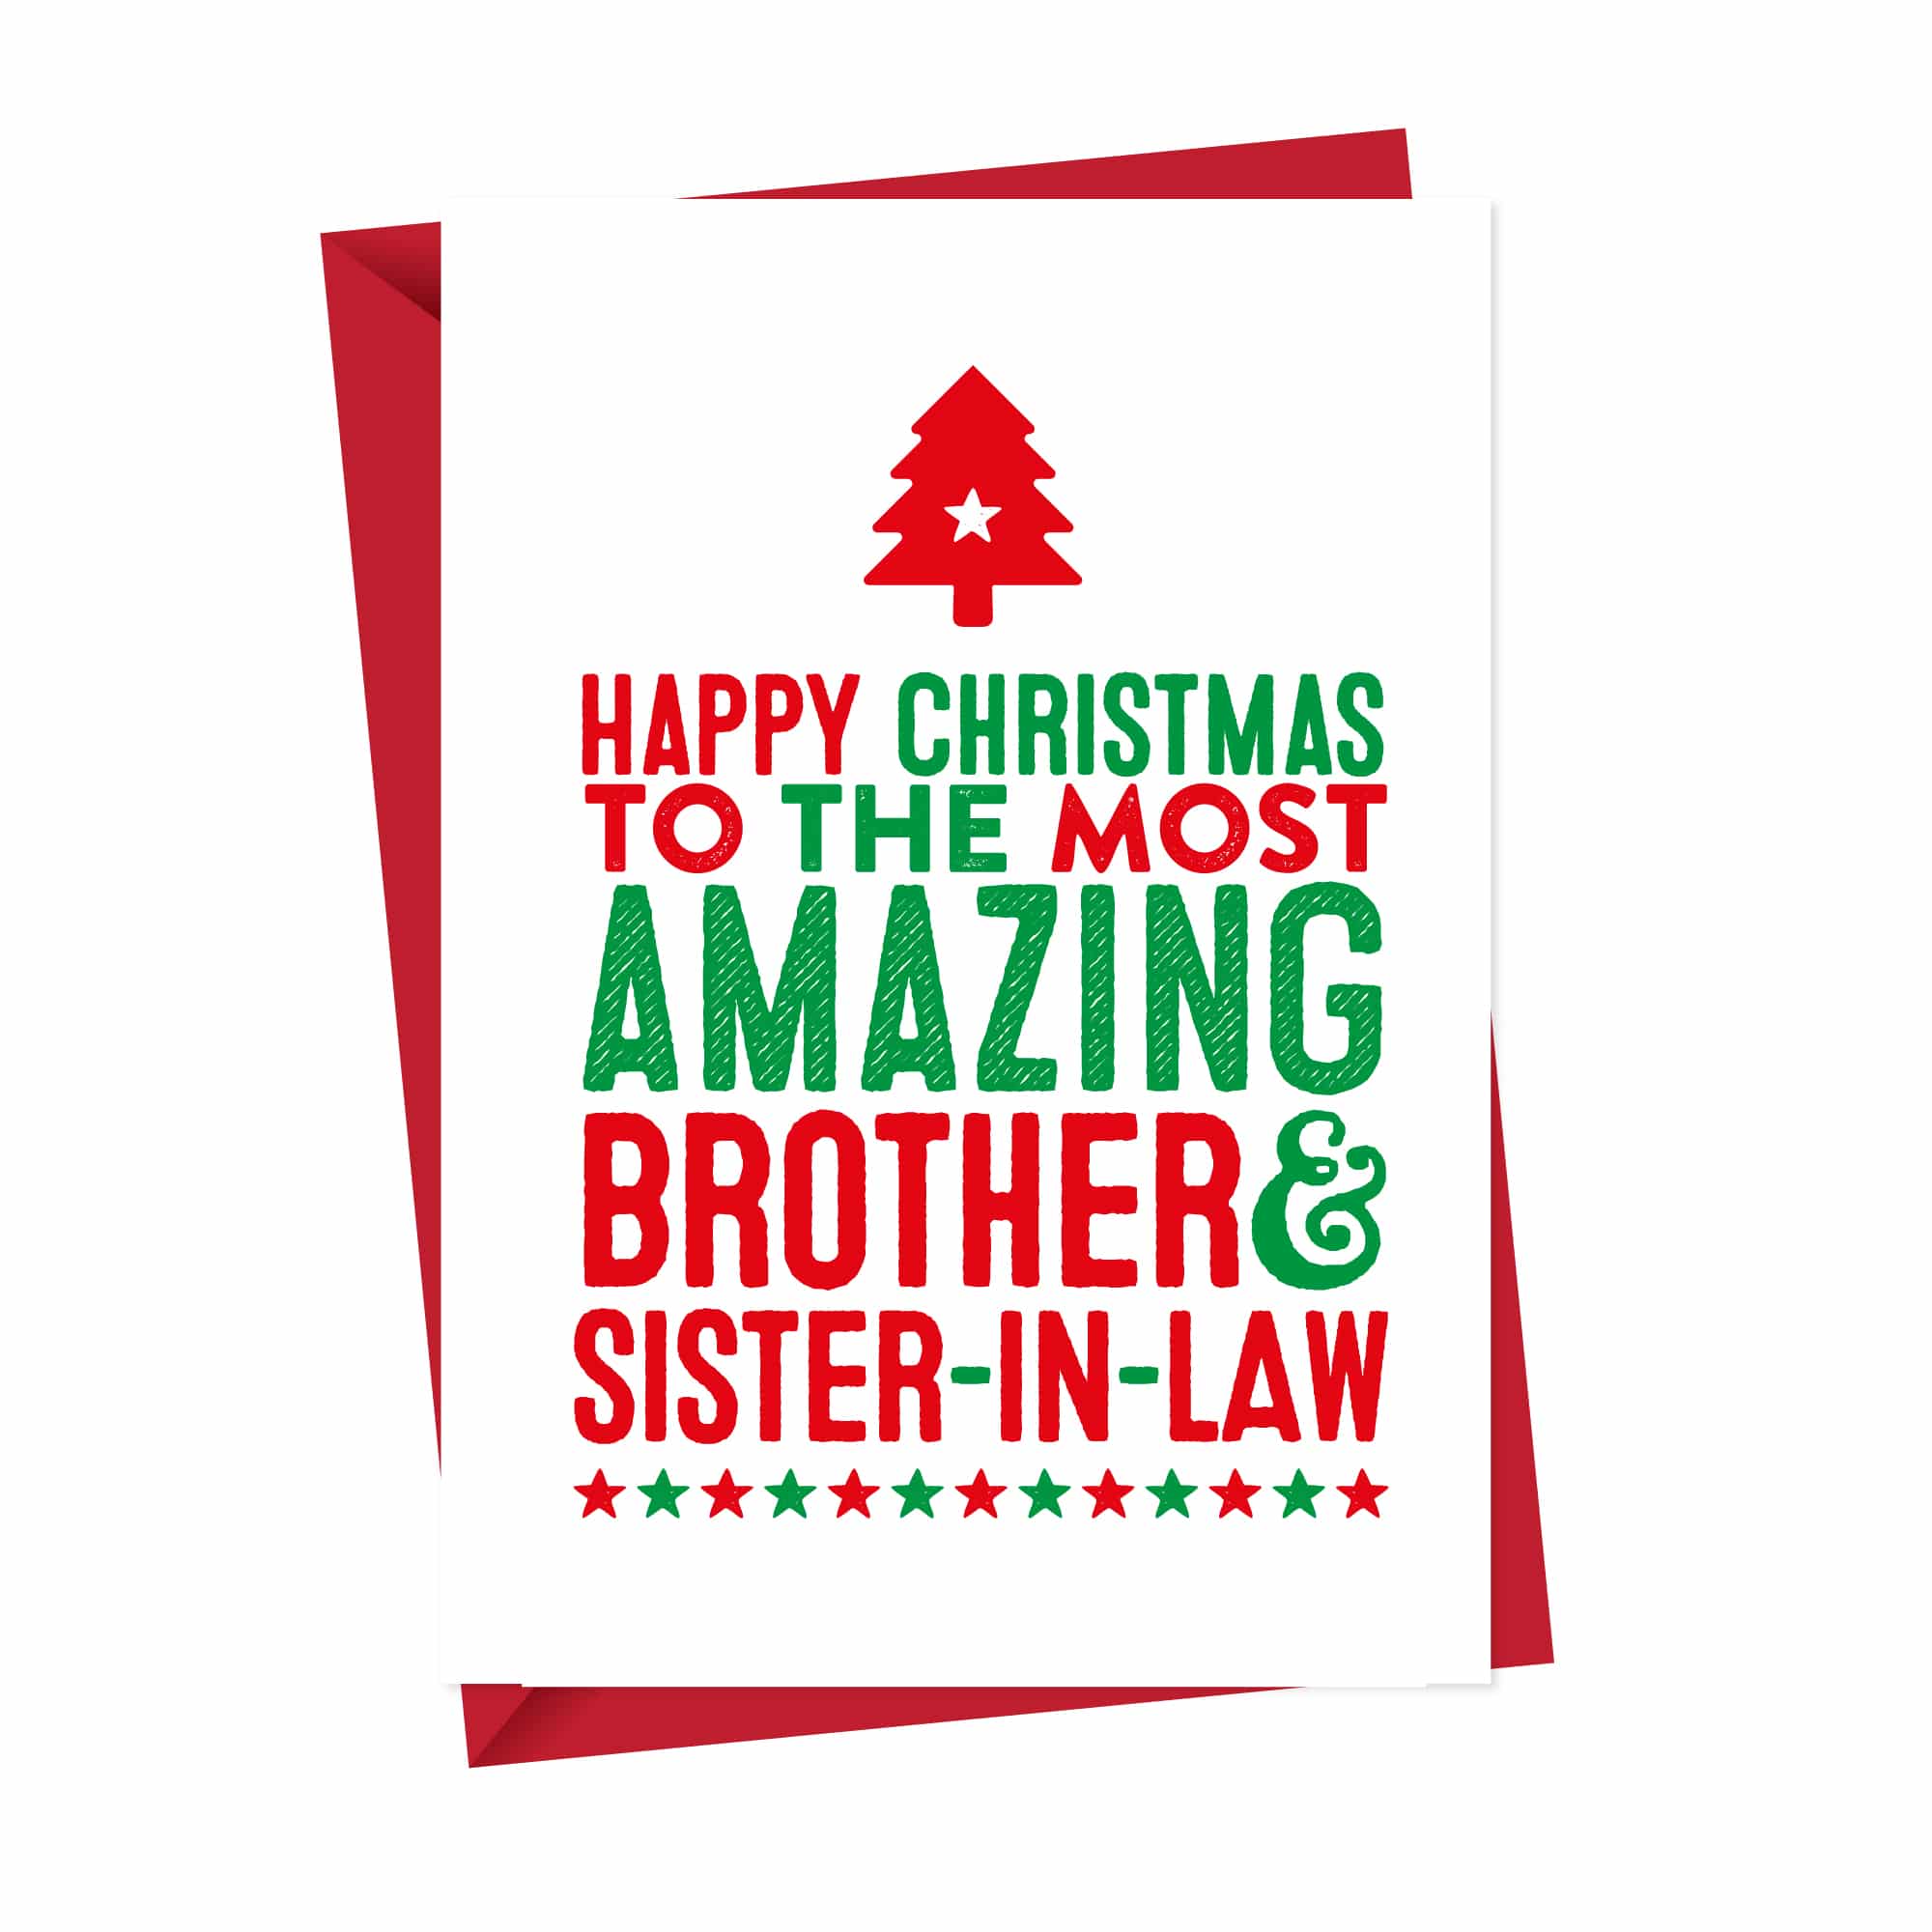 Amazing Brother & Sister in Law Christmas Card